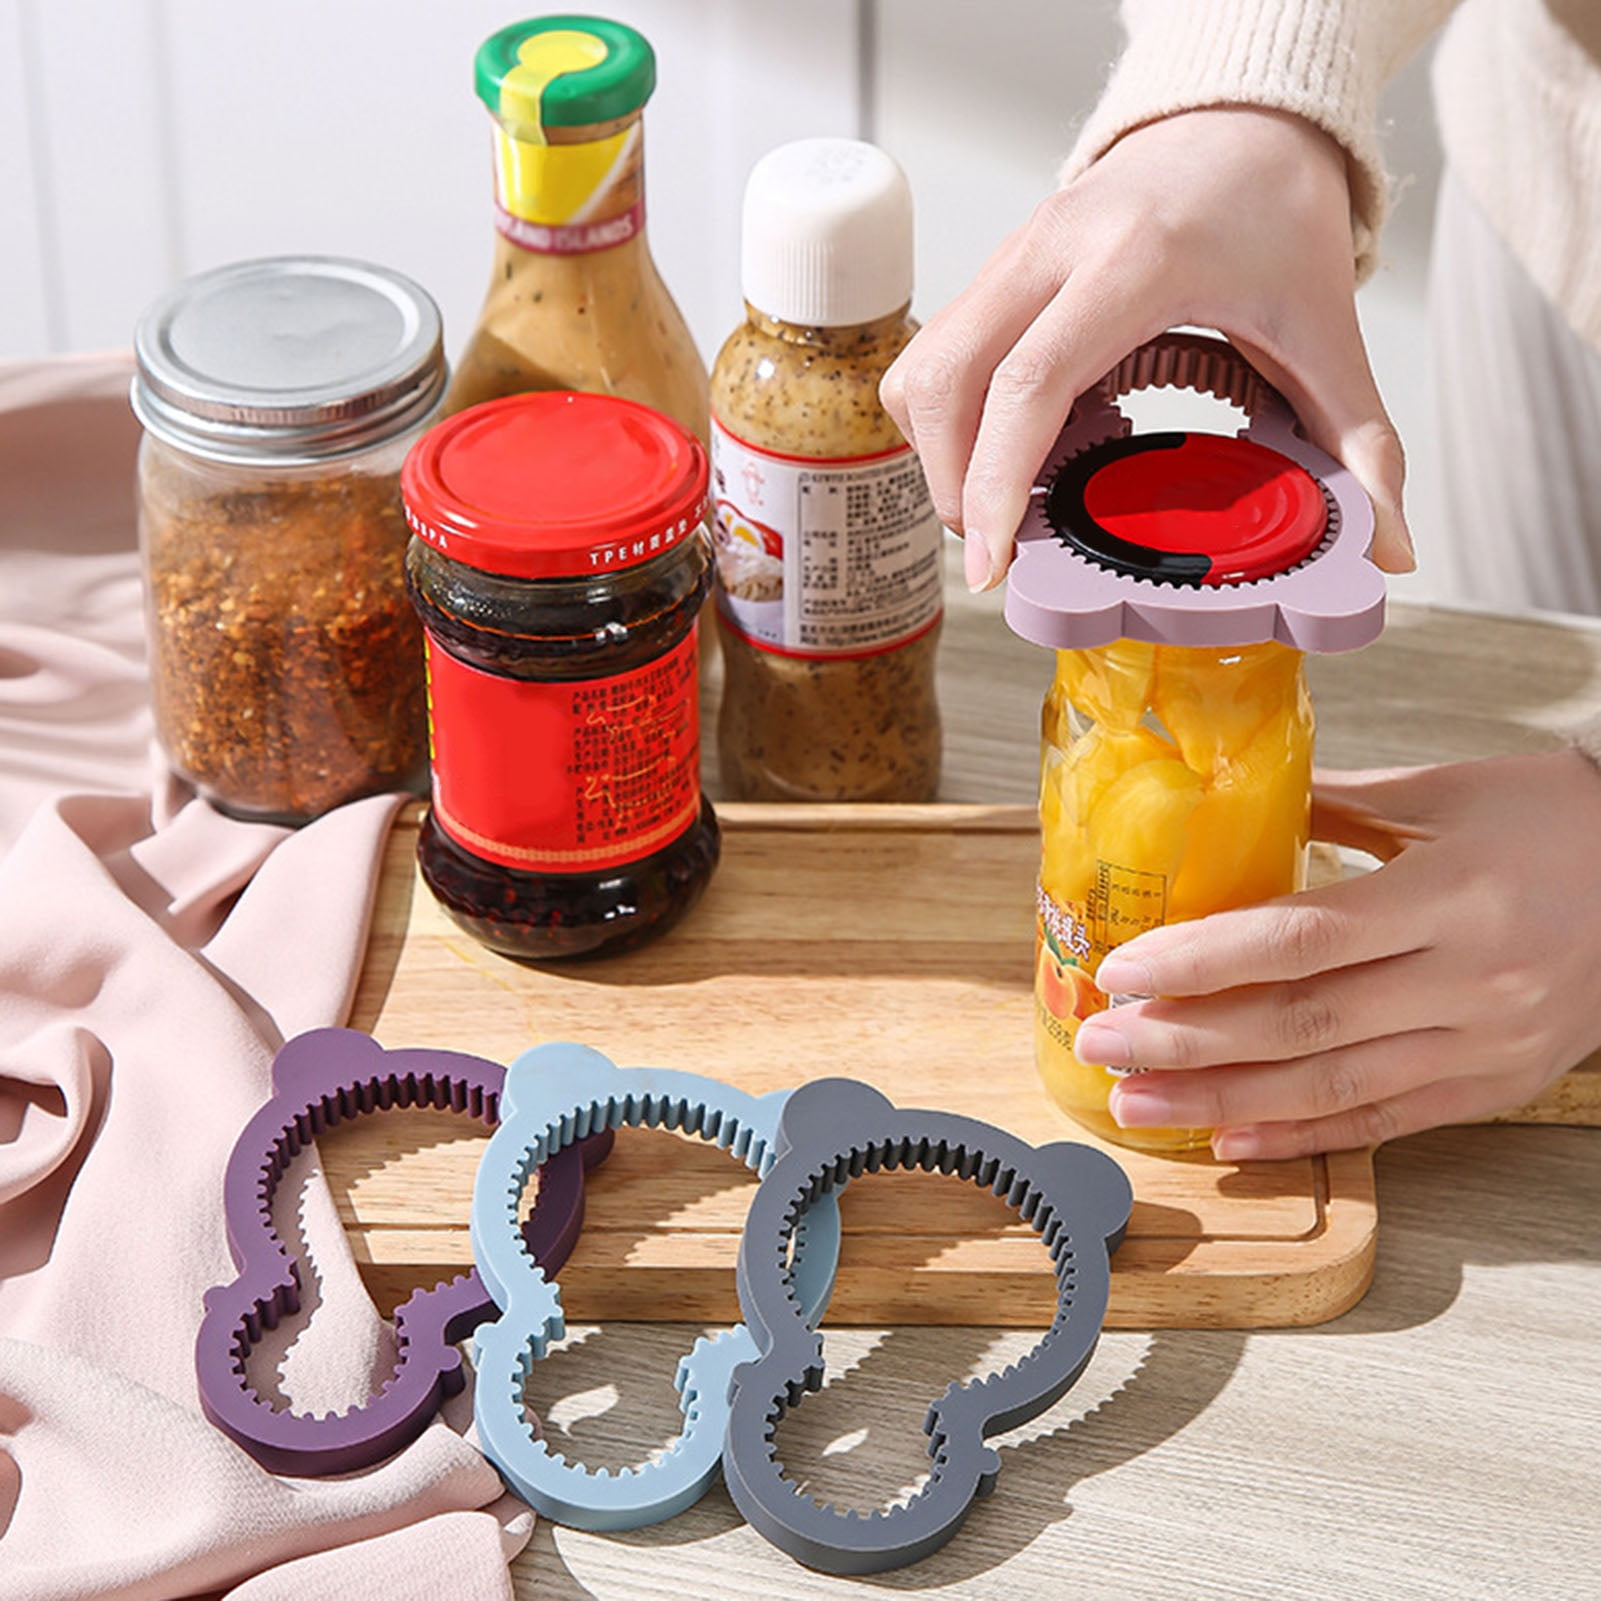 2-Pack: Multifunctional 4-in-1 Jar Opener for Arthritic Hands and Seniors | Blue